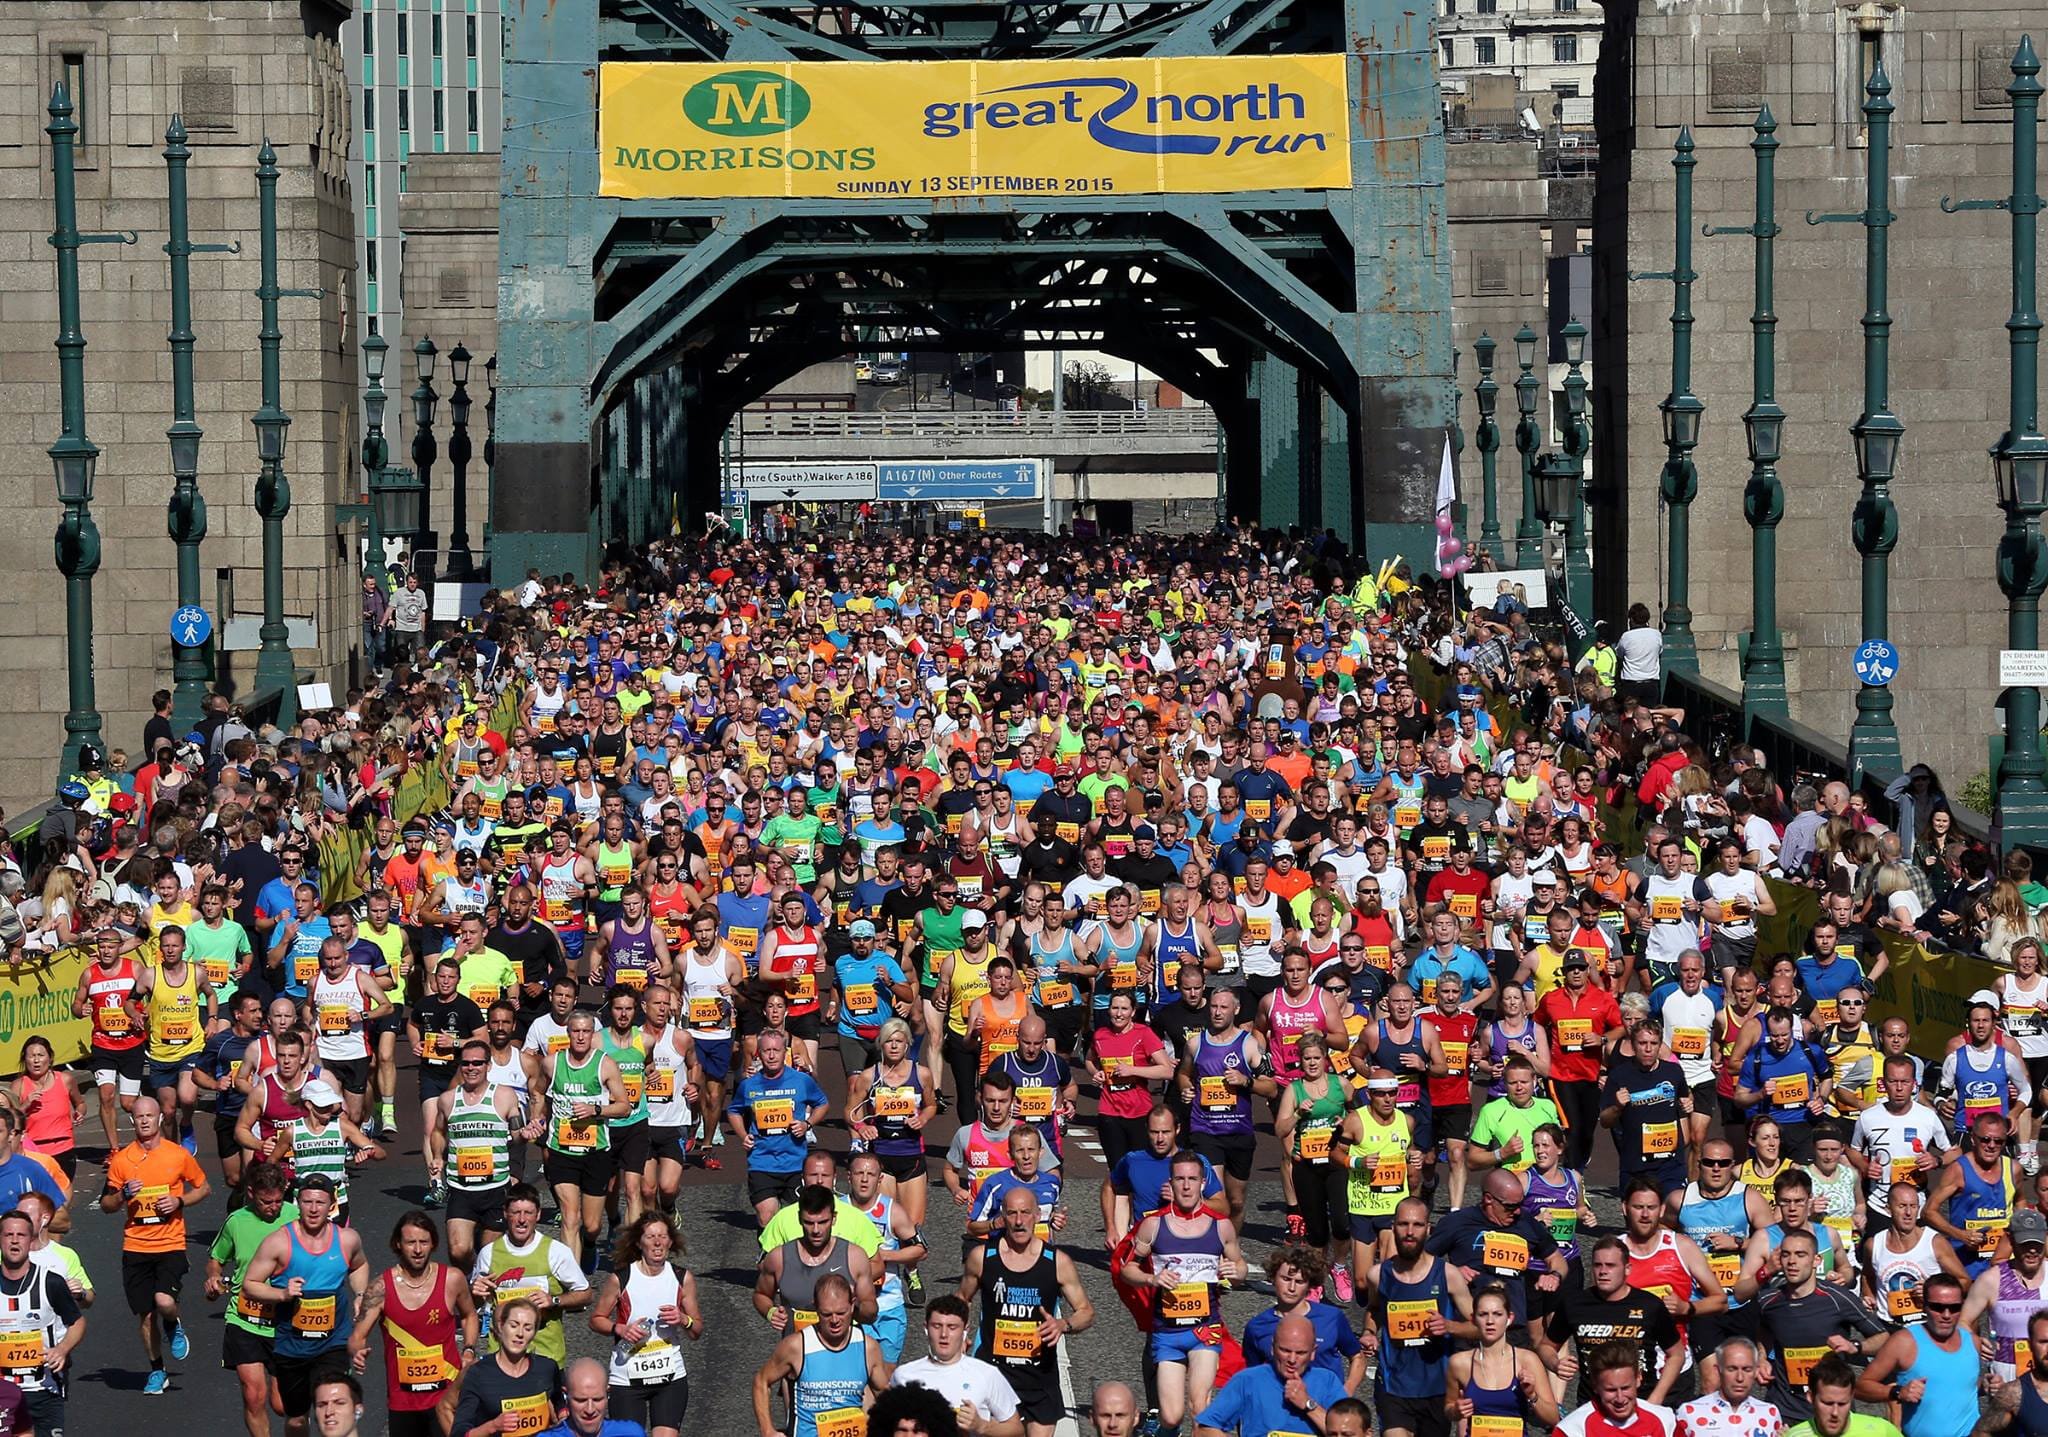 The Great North Run takes place in Newcastle